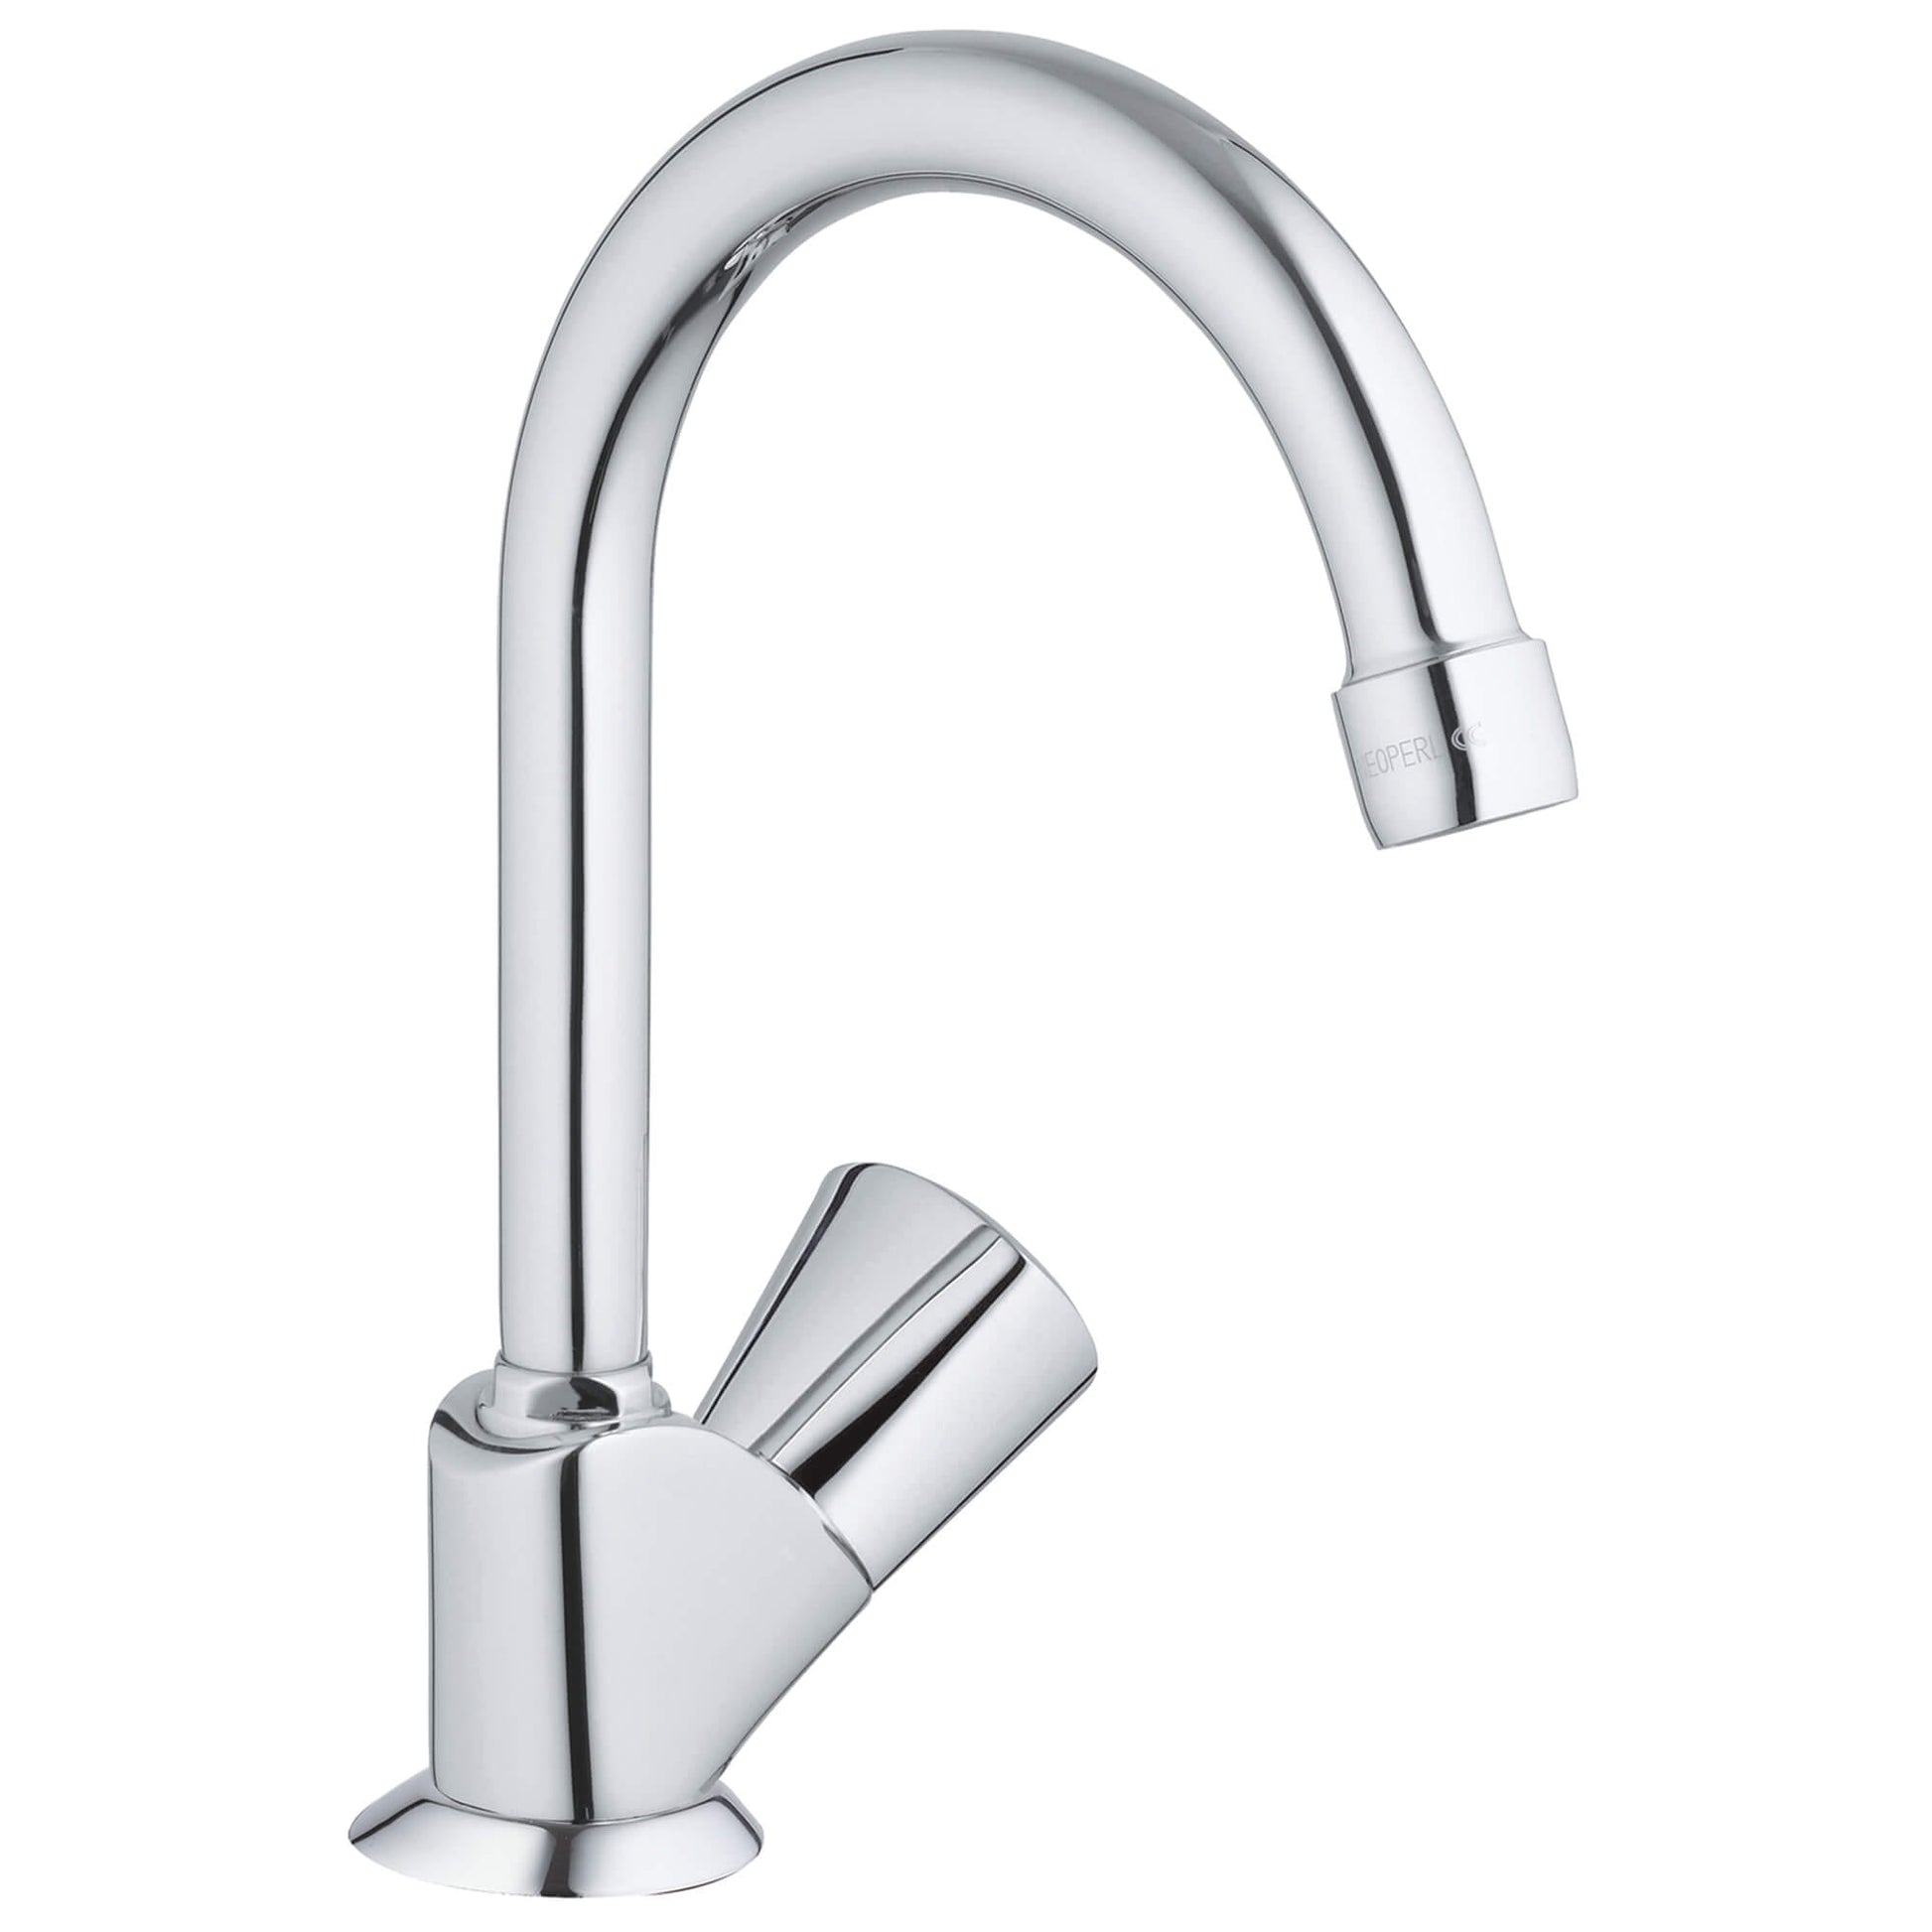 GROHE 20179001 Costa Chrome Single-Handle Kitchen Faucet 1.75 GPM